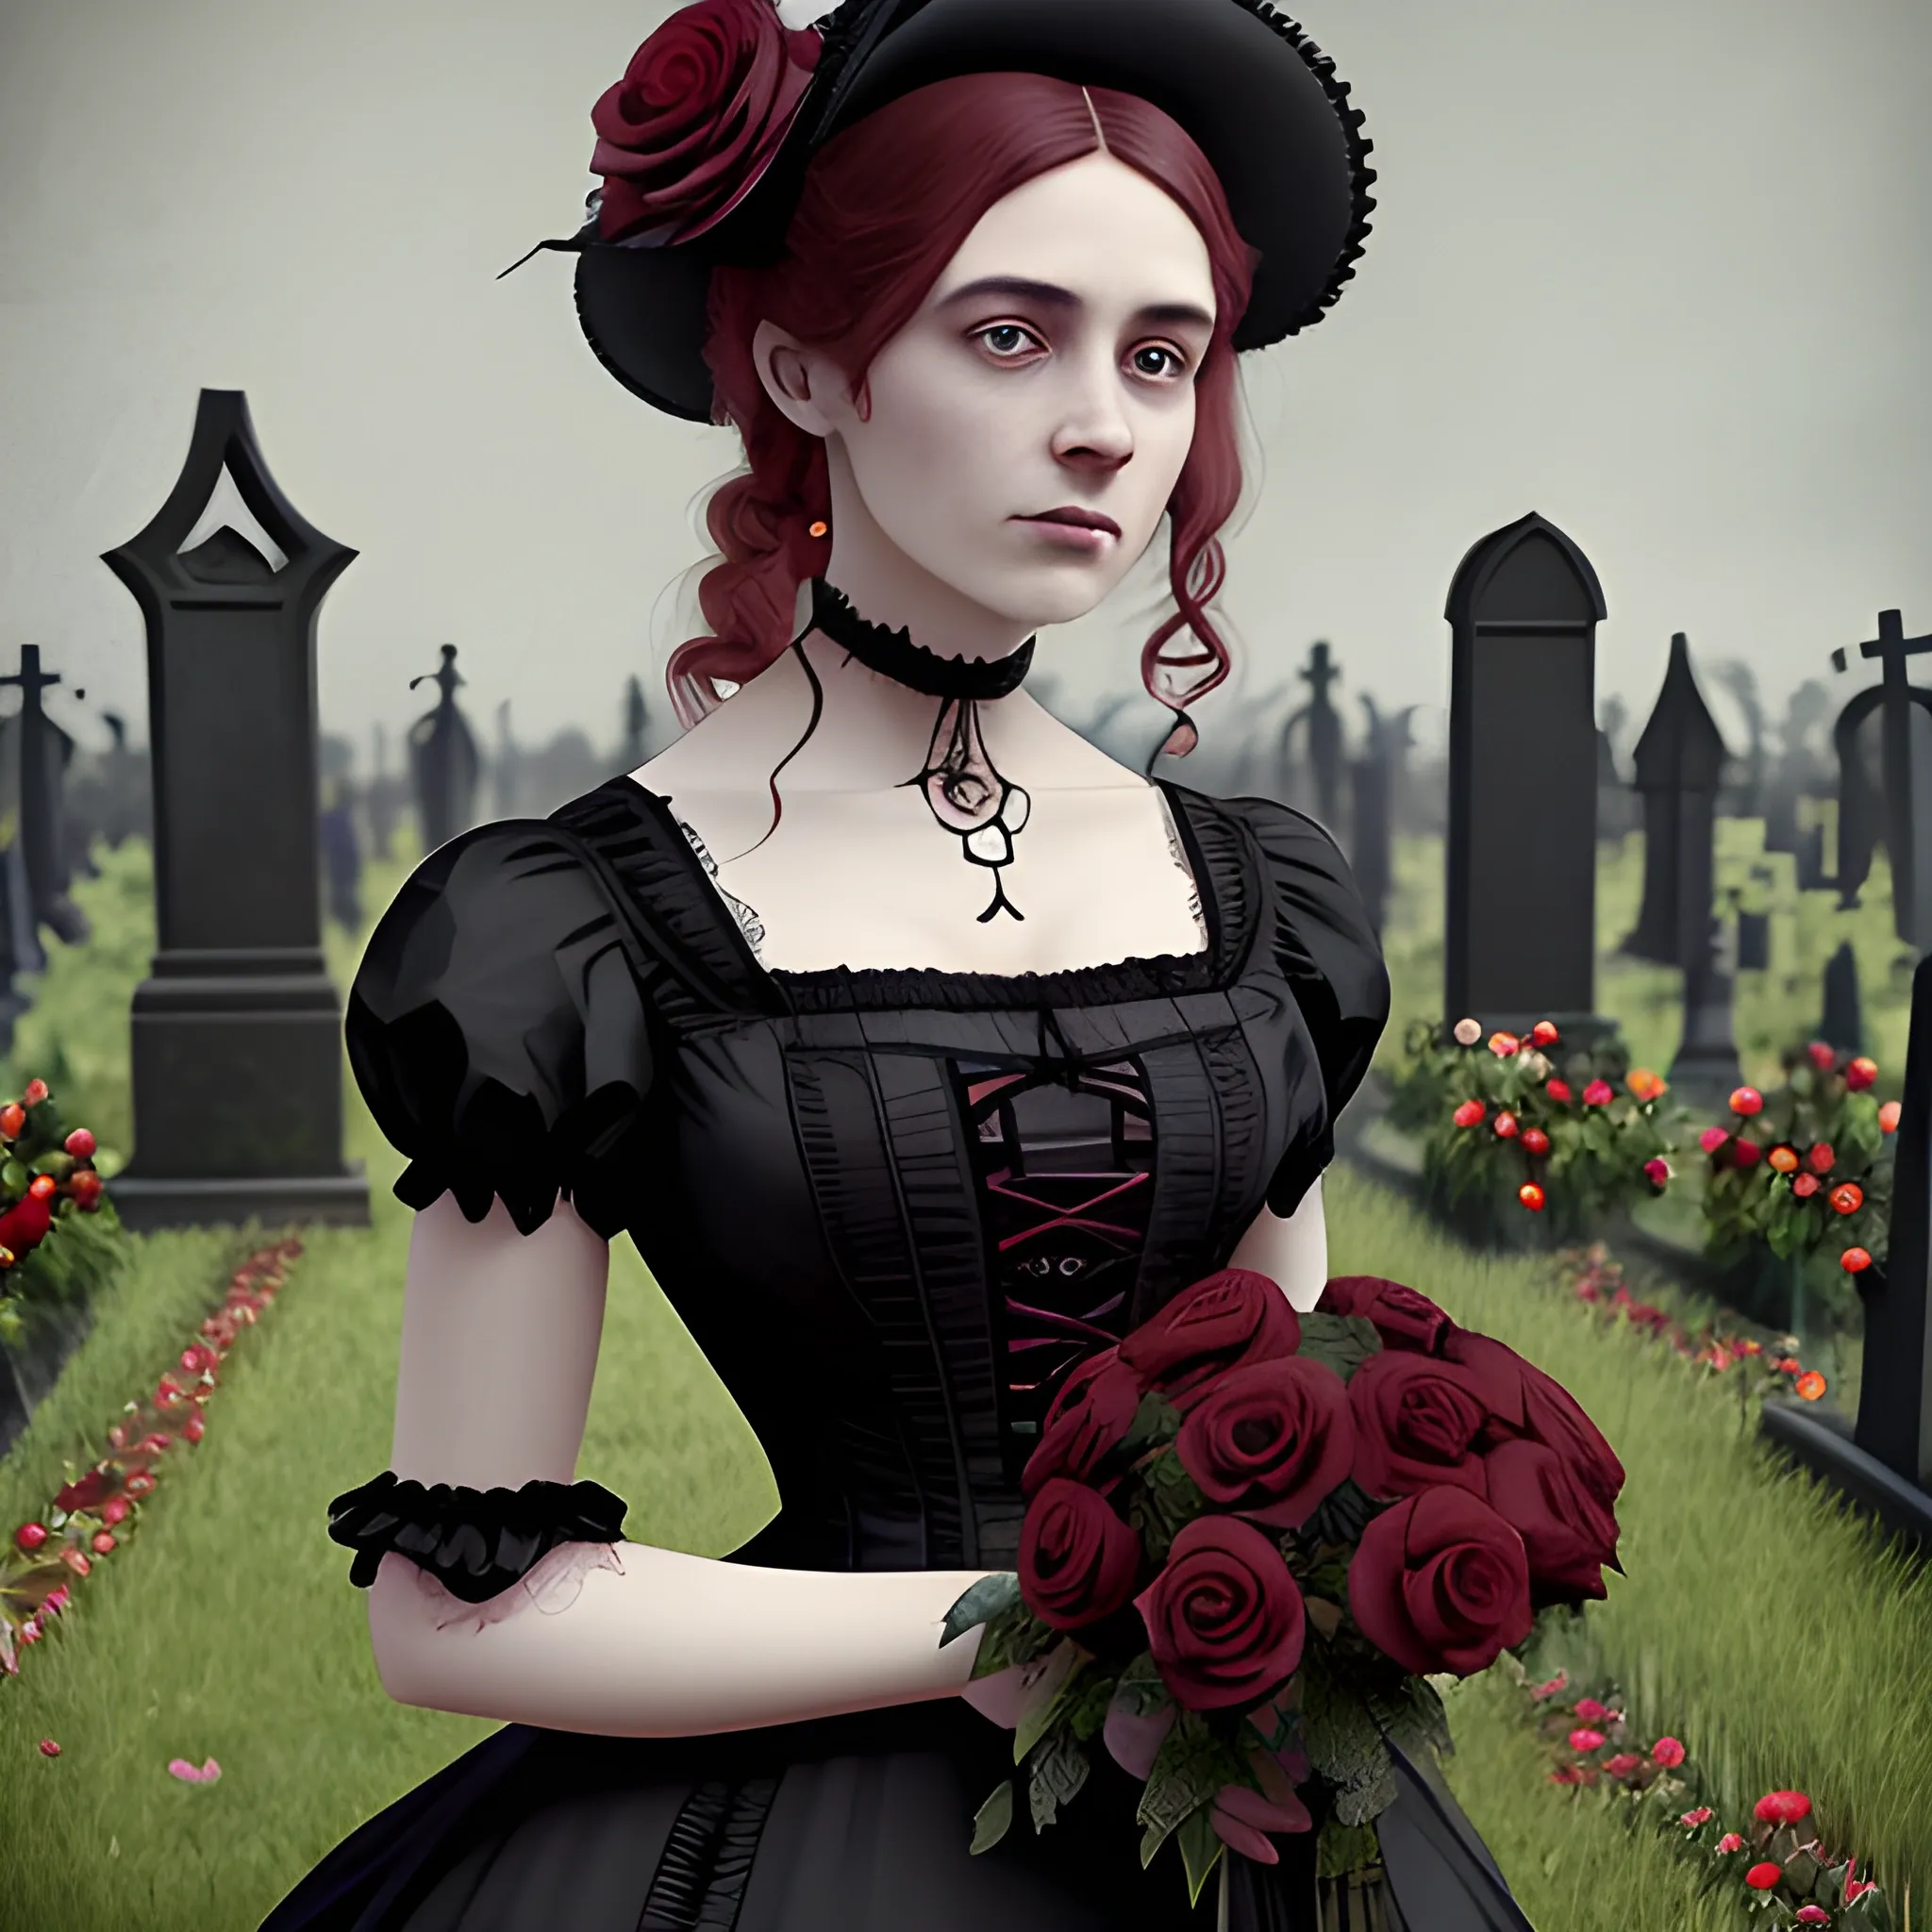 A woman in a Victorian dress, in the midst of a cemetery with red roses. Type of Image: Digital illustration. Art Styles: Realism, Gothic, Victorian. Art Inspirations: ArtStation, DeviantArt, Tim Burton's aesthetic. Camera: Close-up shot. Render Related Information: High resolution (4K), detailed and intricate details., Pencil Sketch